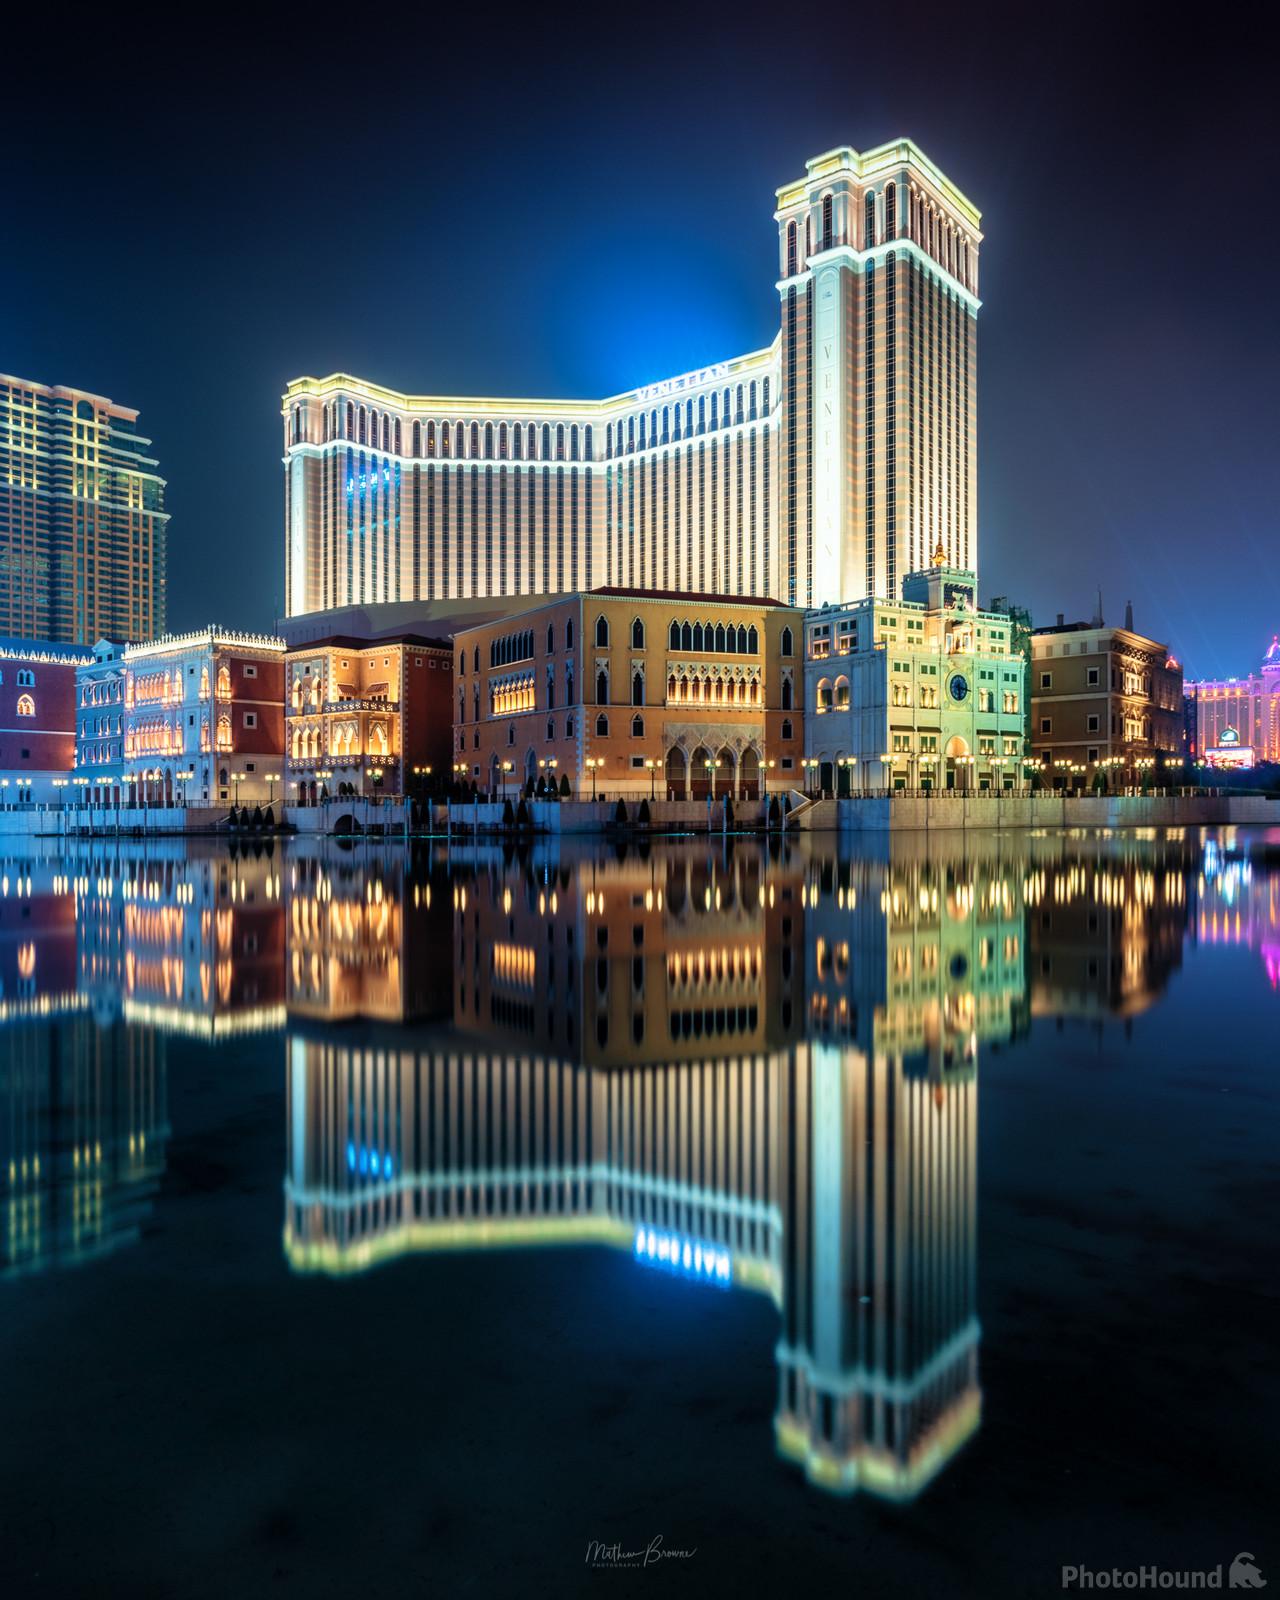 Image of Venetian Macao - Exterior by Mathew Browne